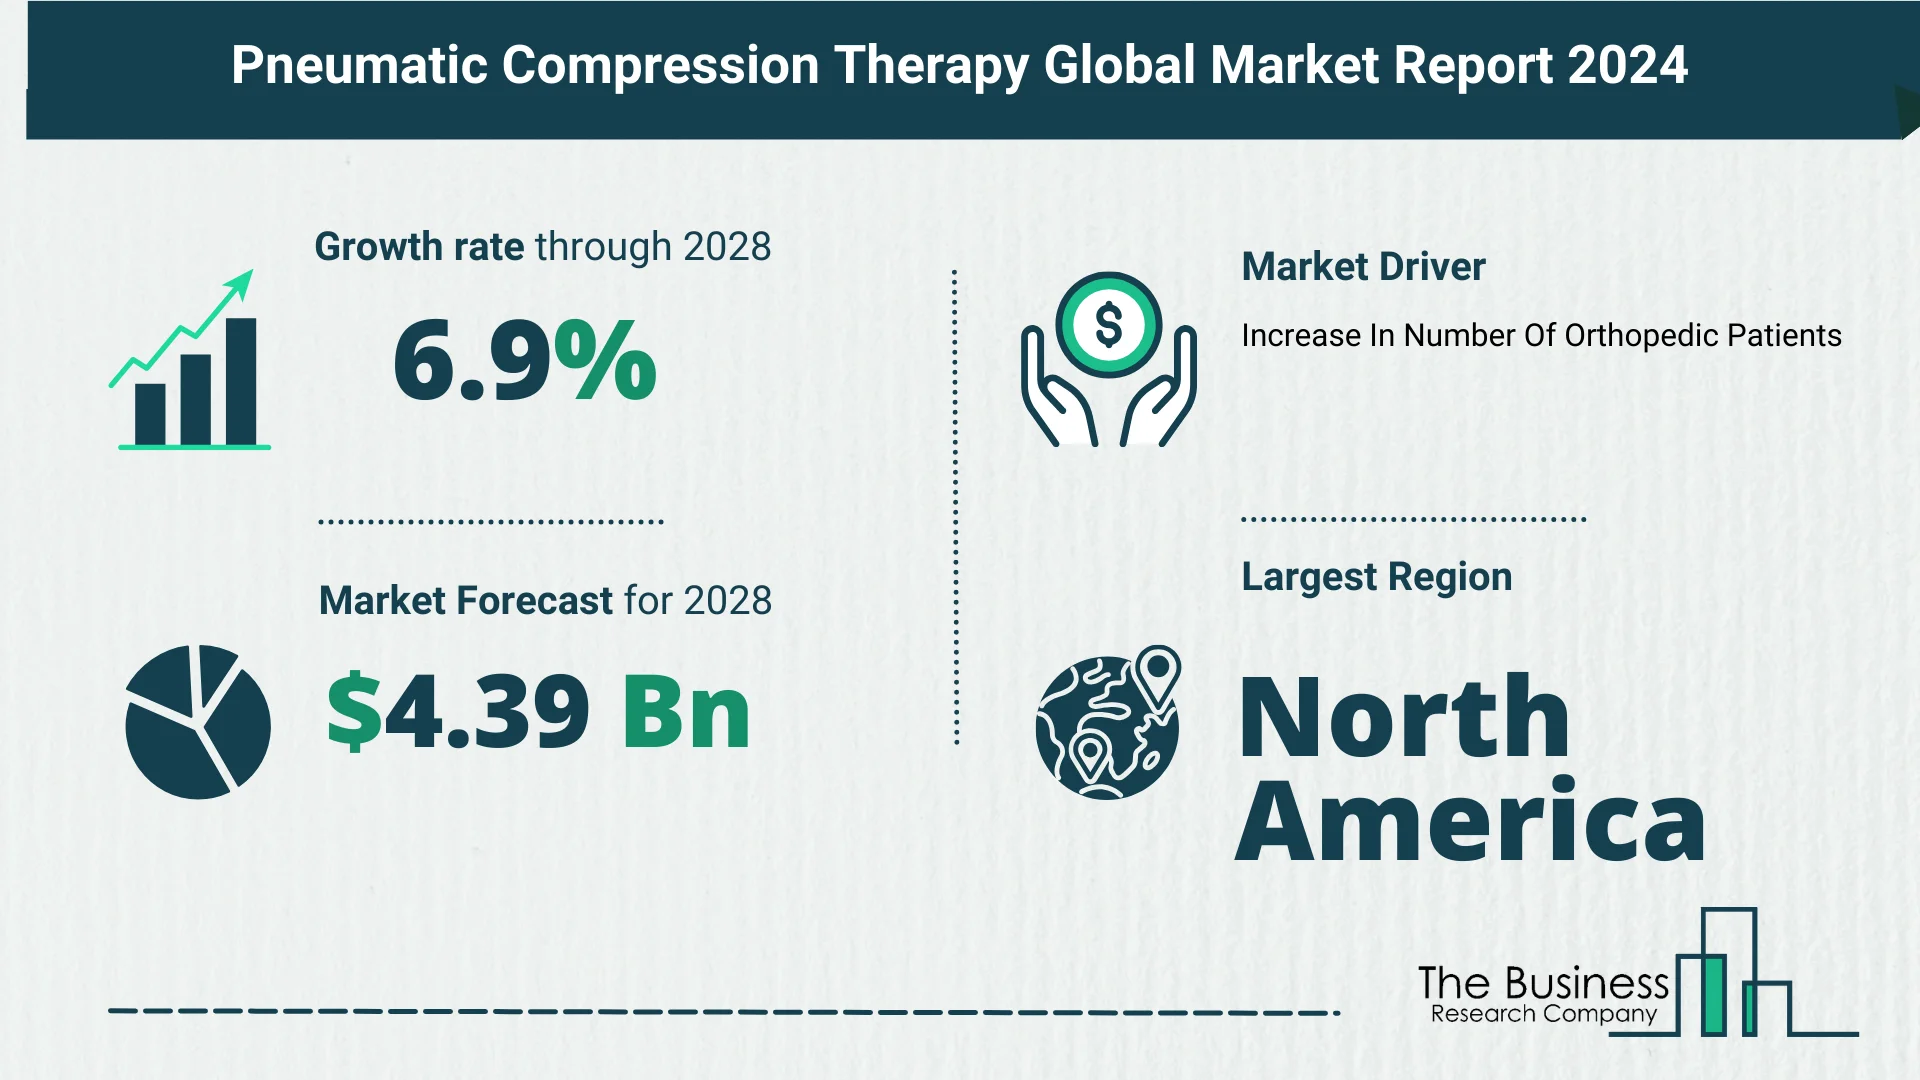 Global Pneumatic Compression Therapy Market Size